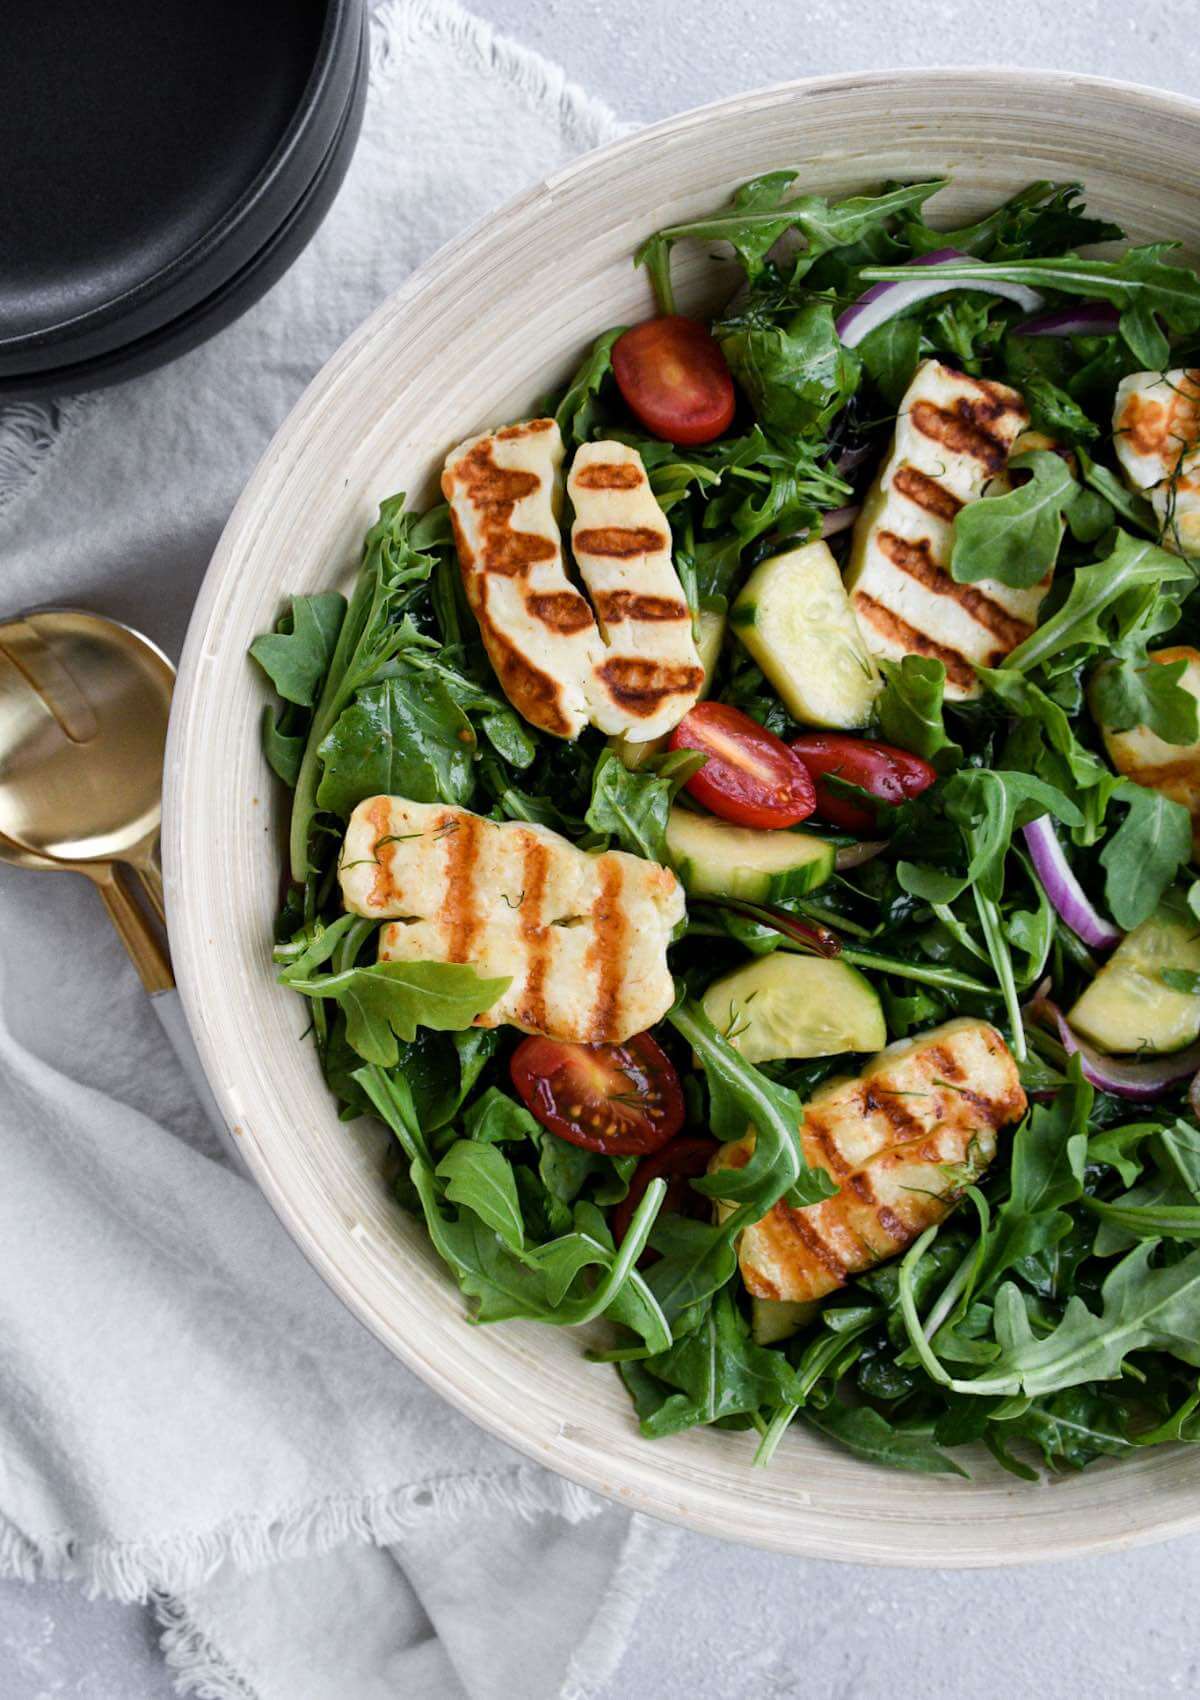 halloumi cheese salad with grilled halloumi, fresh greens, tomatoes, onions, and dill in a wooden bowl.